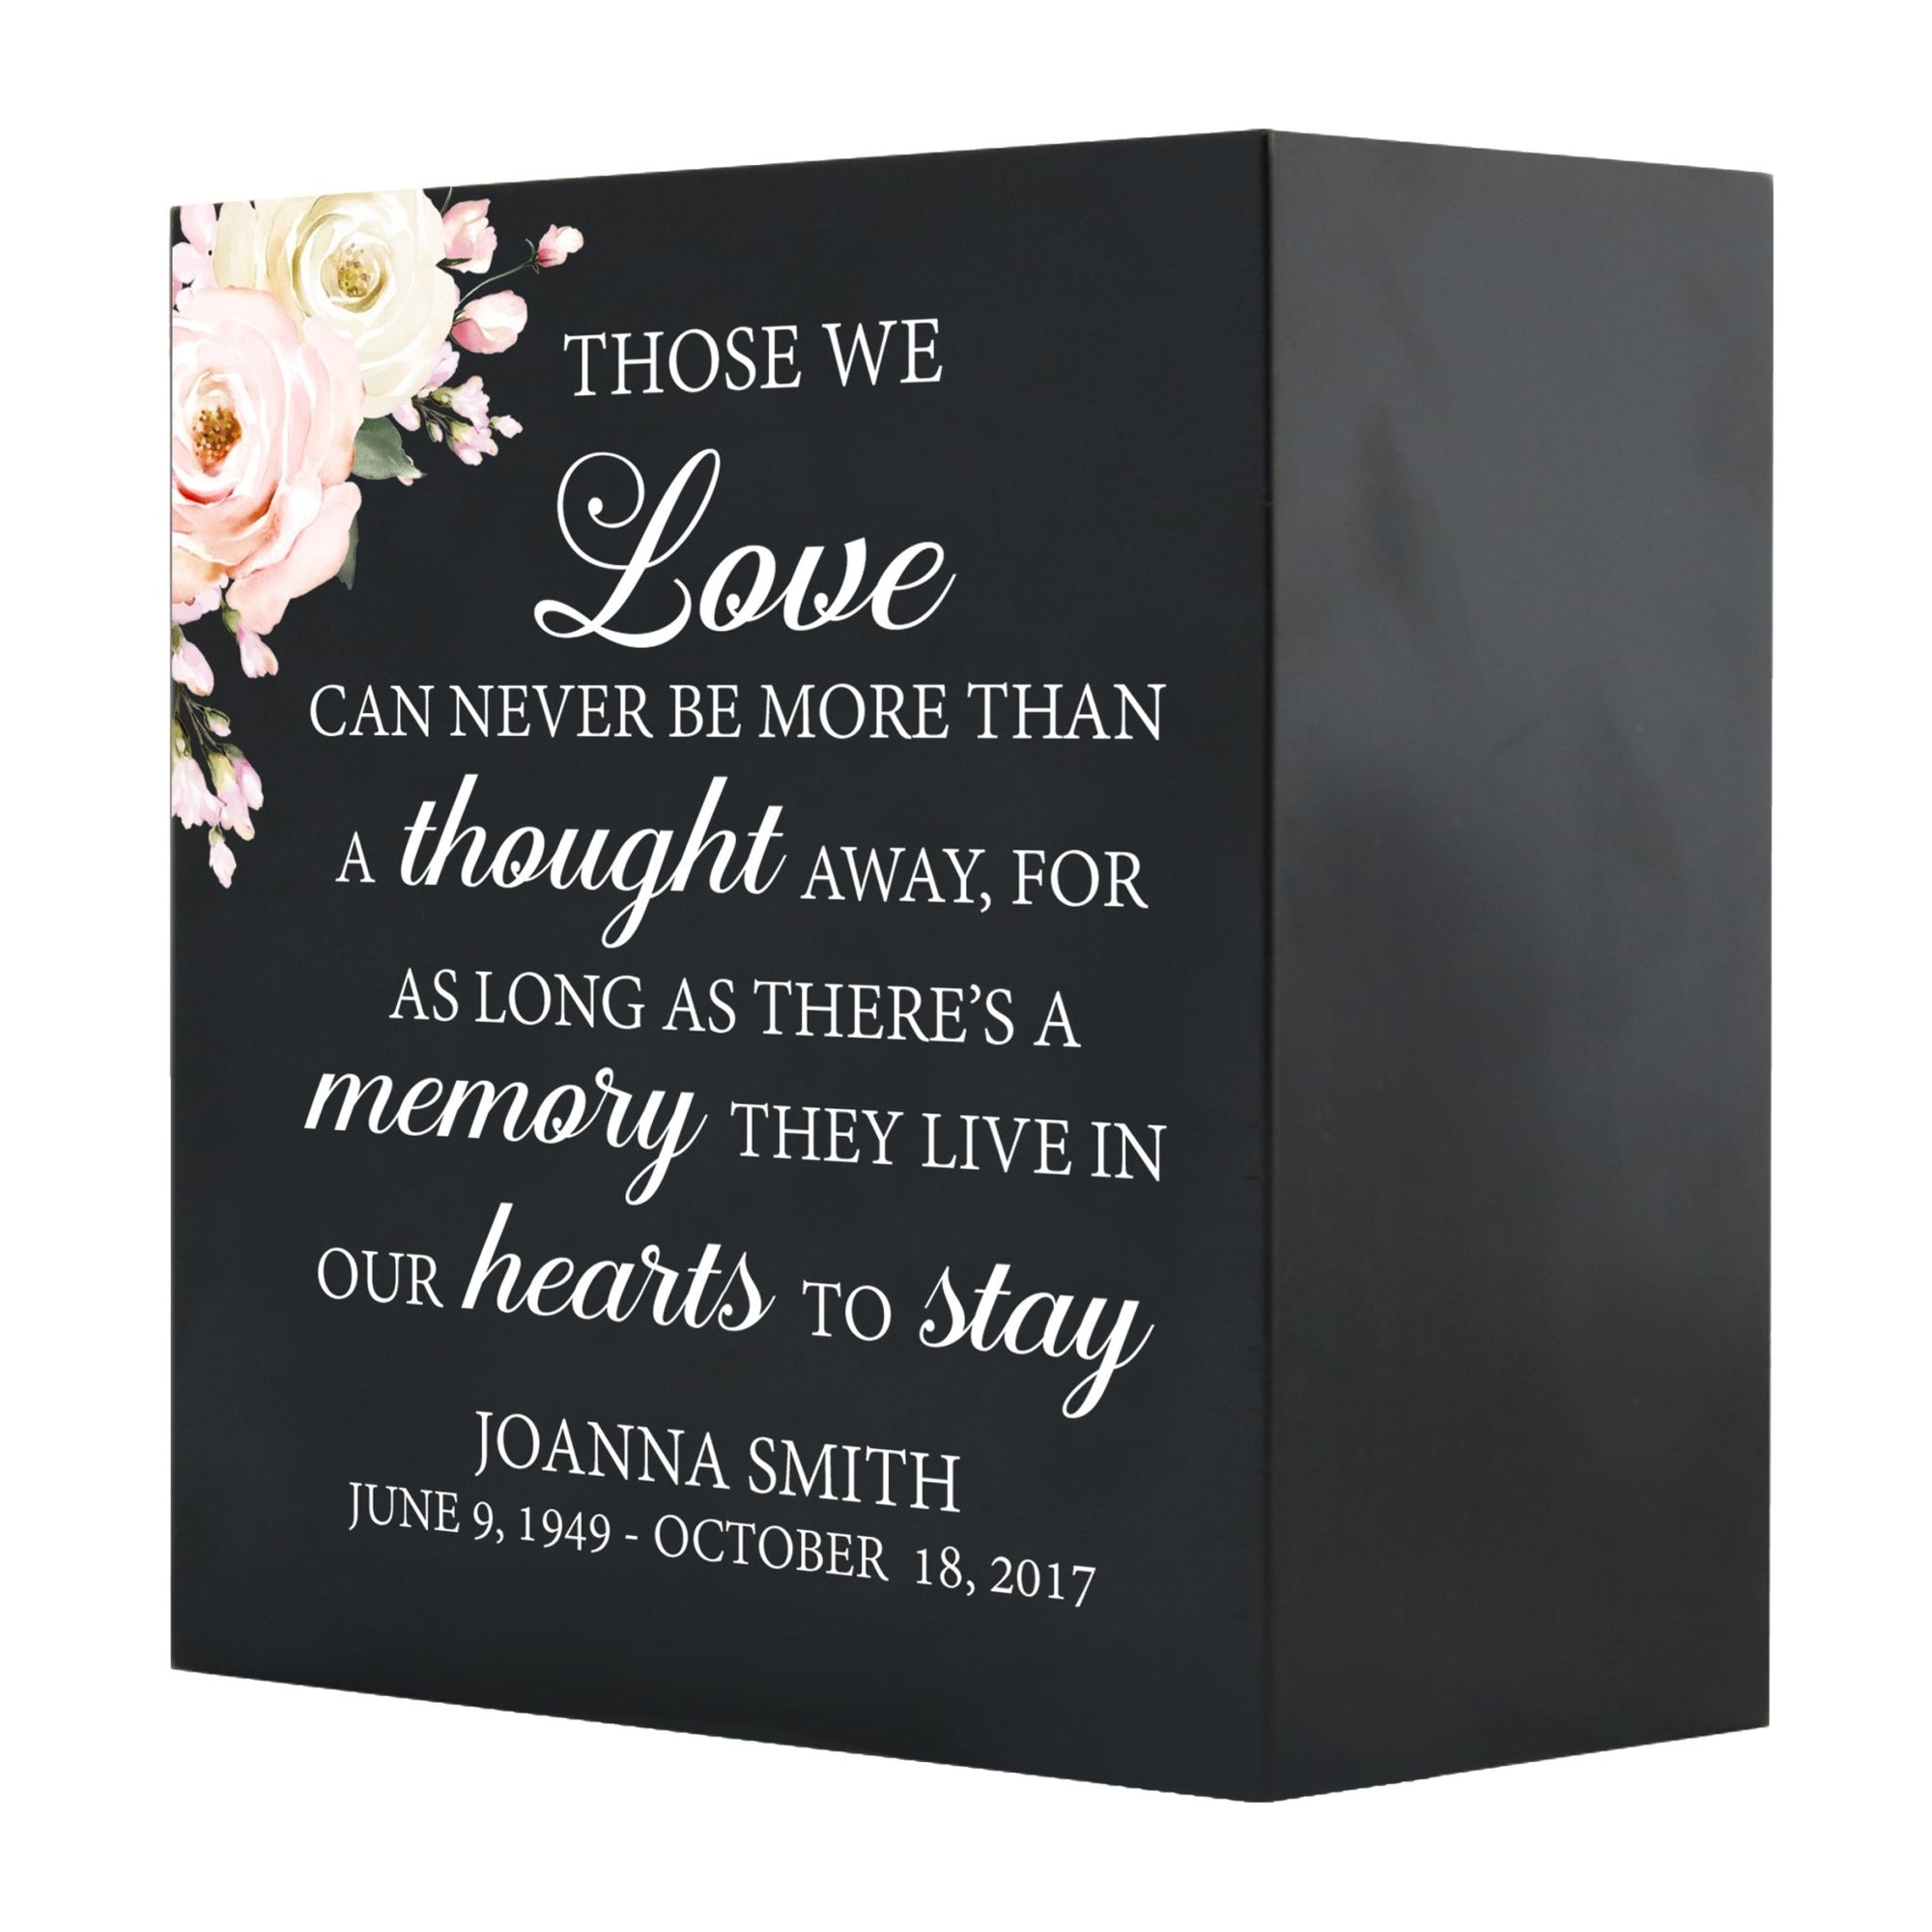 Personalized Modern Inspirational Memorial Wooden Shadow Box and Urn 6x6 holds 53 cu in of Human Ashes - Those We Love (Black) - LifeSong Milestones